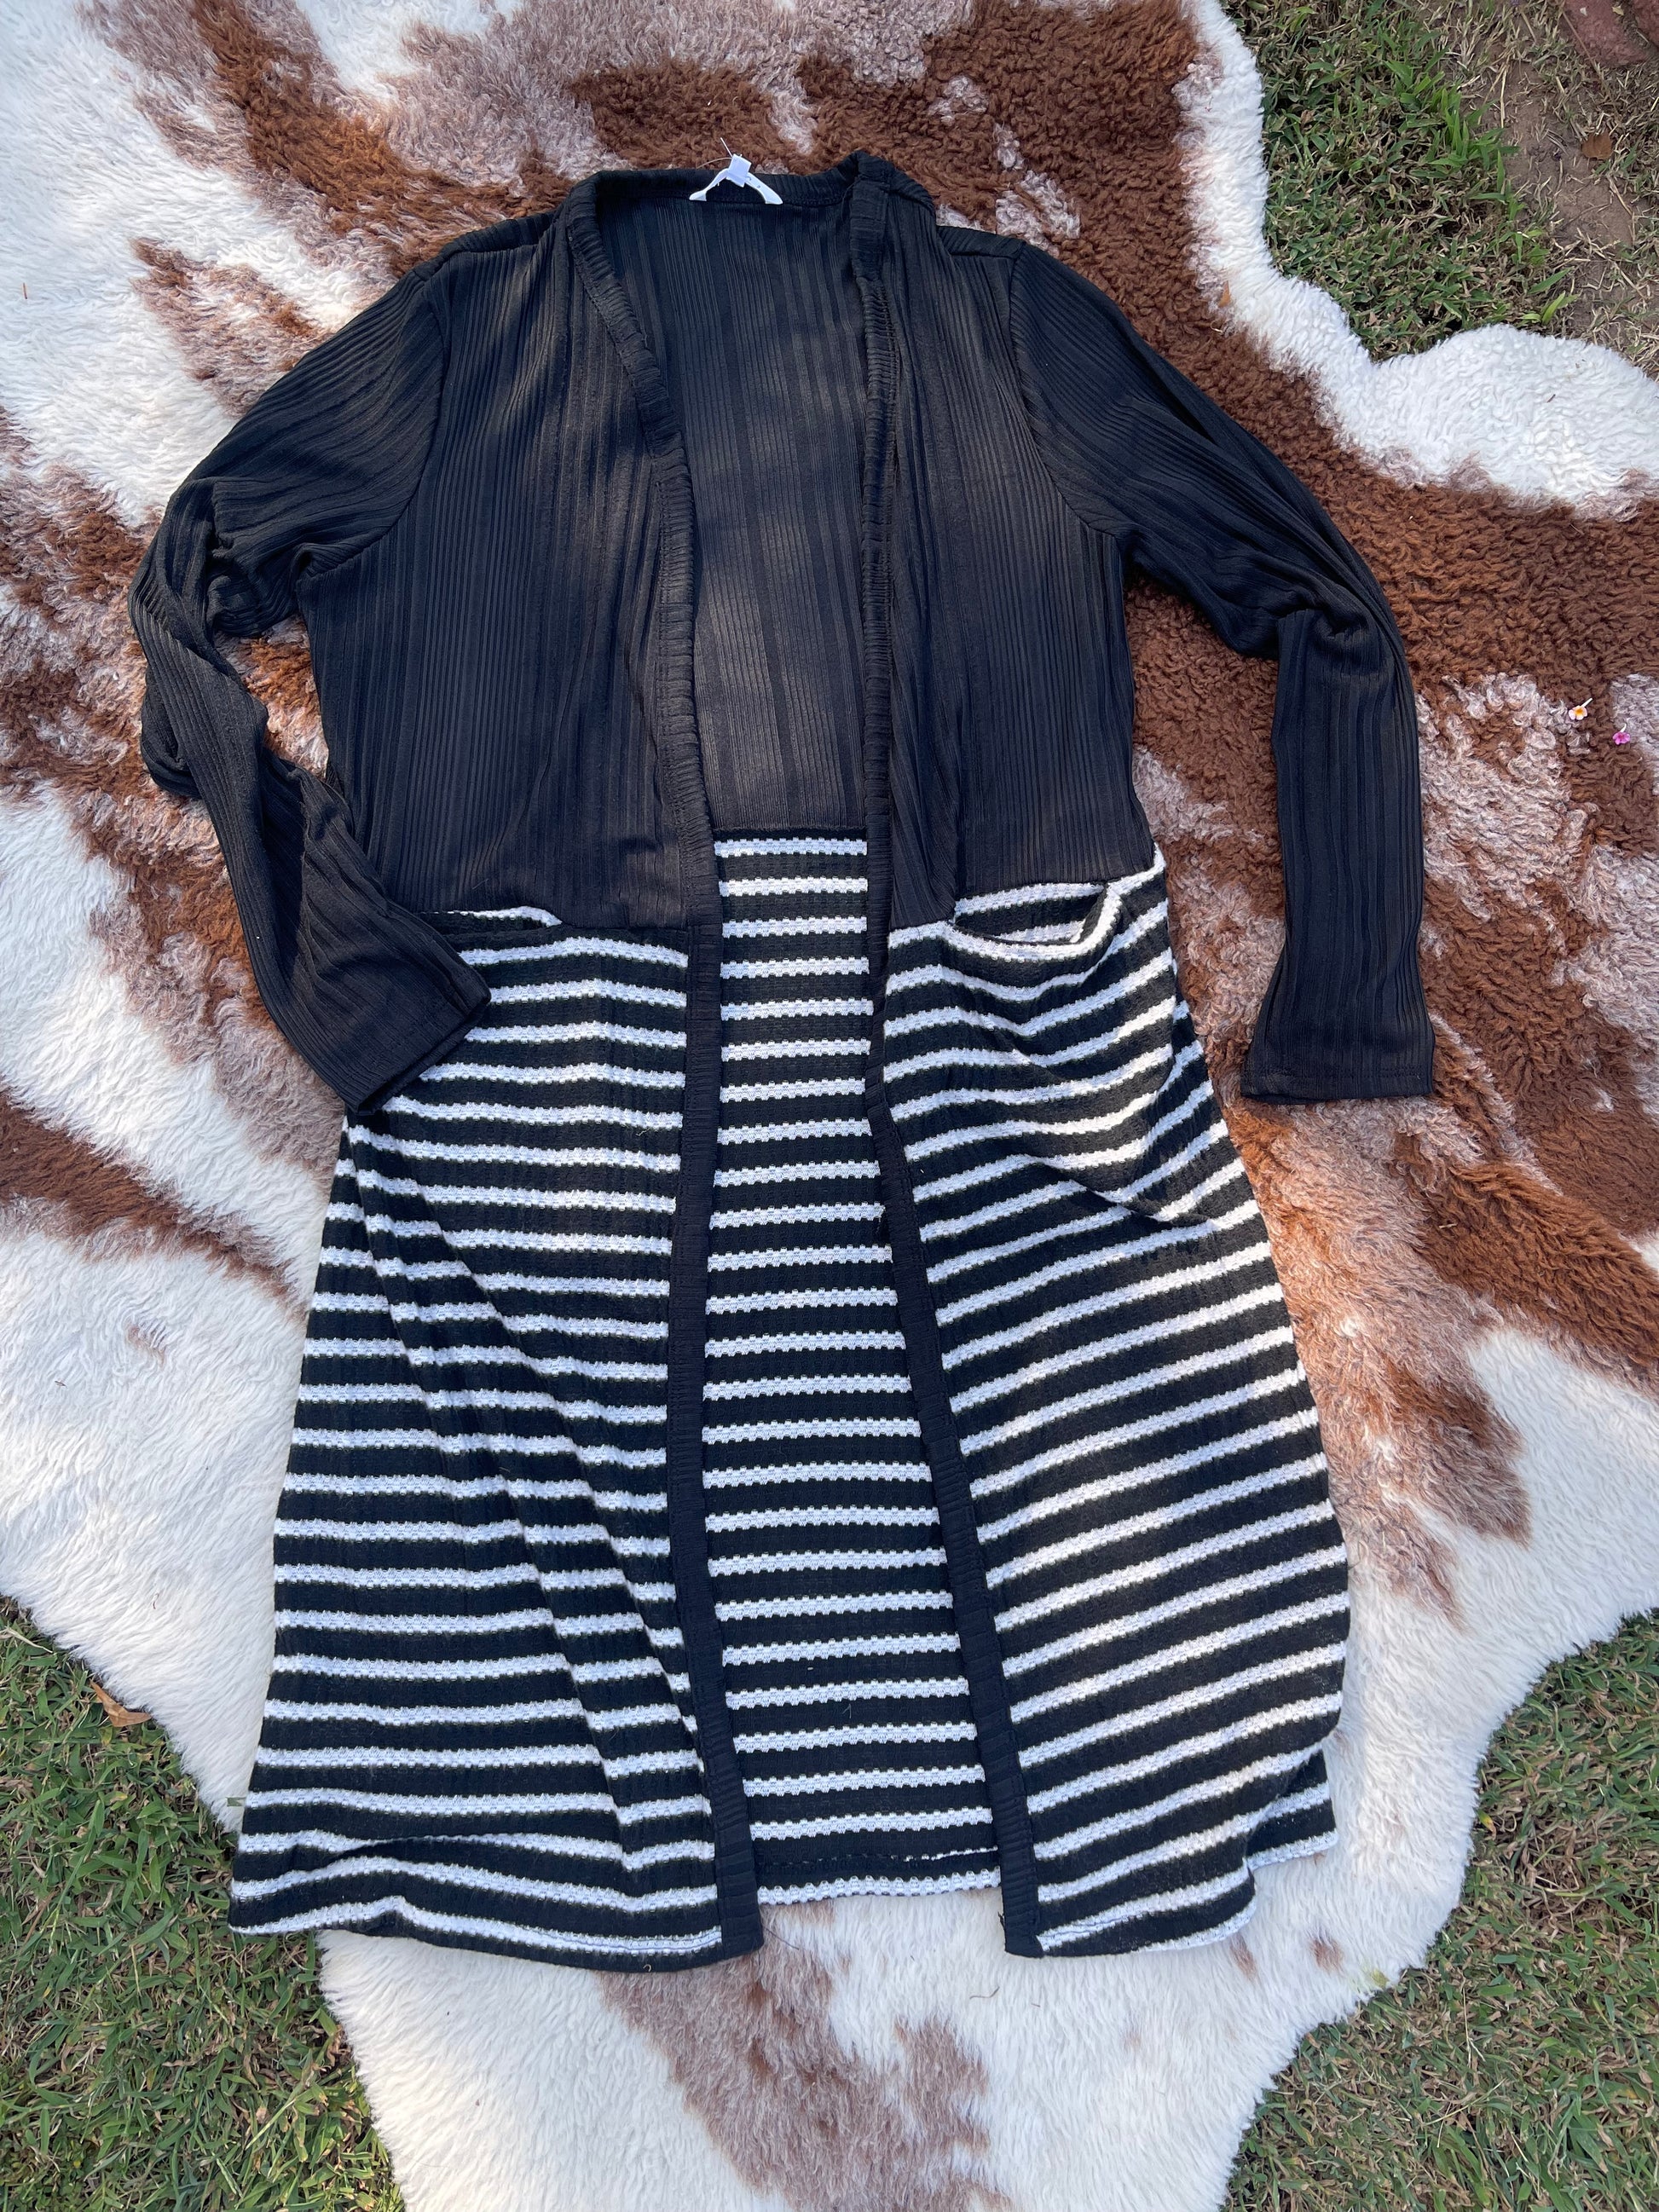 Black and white striped, long duster with pockets